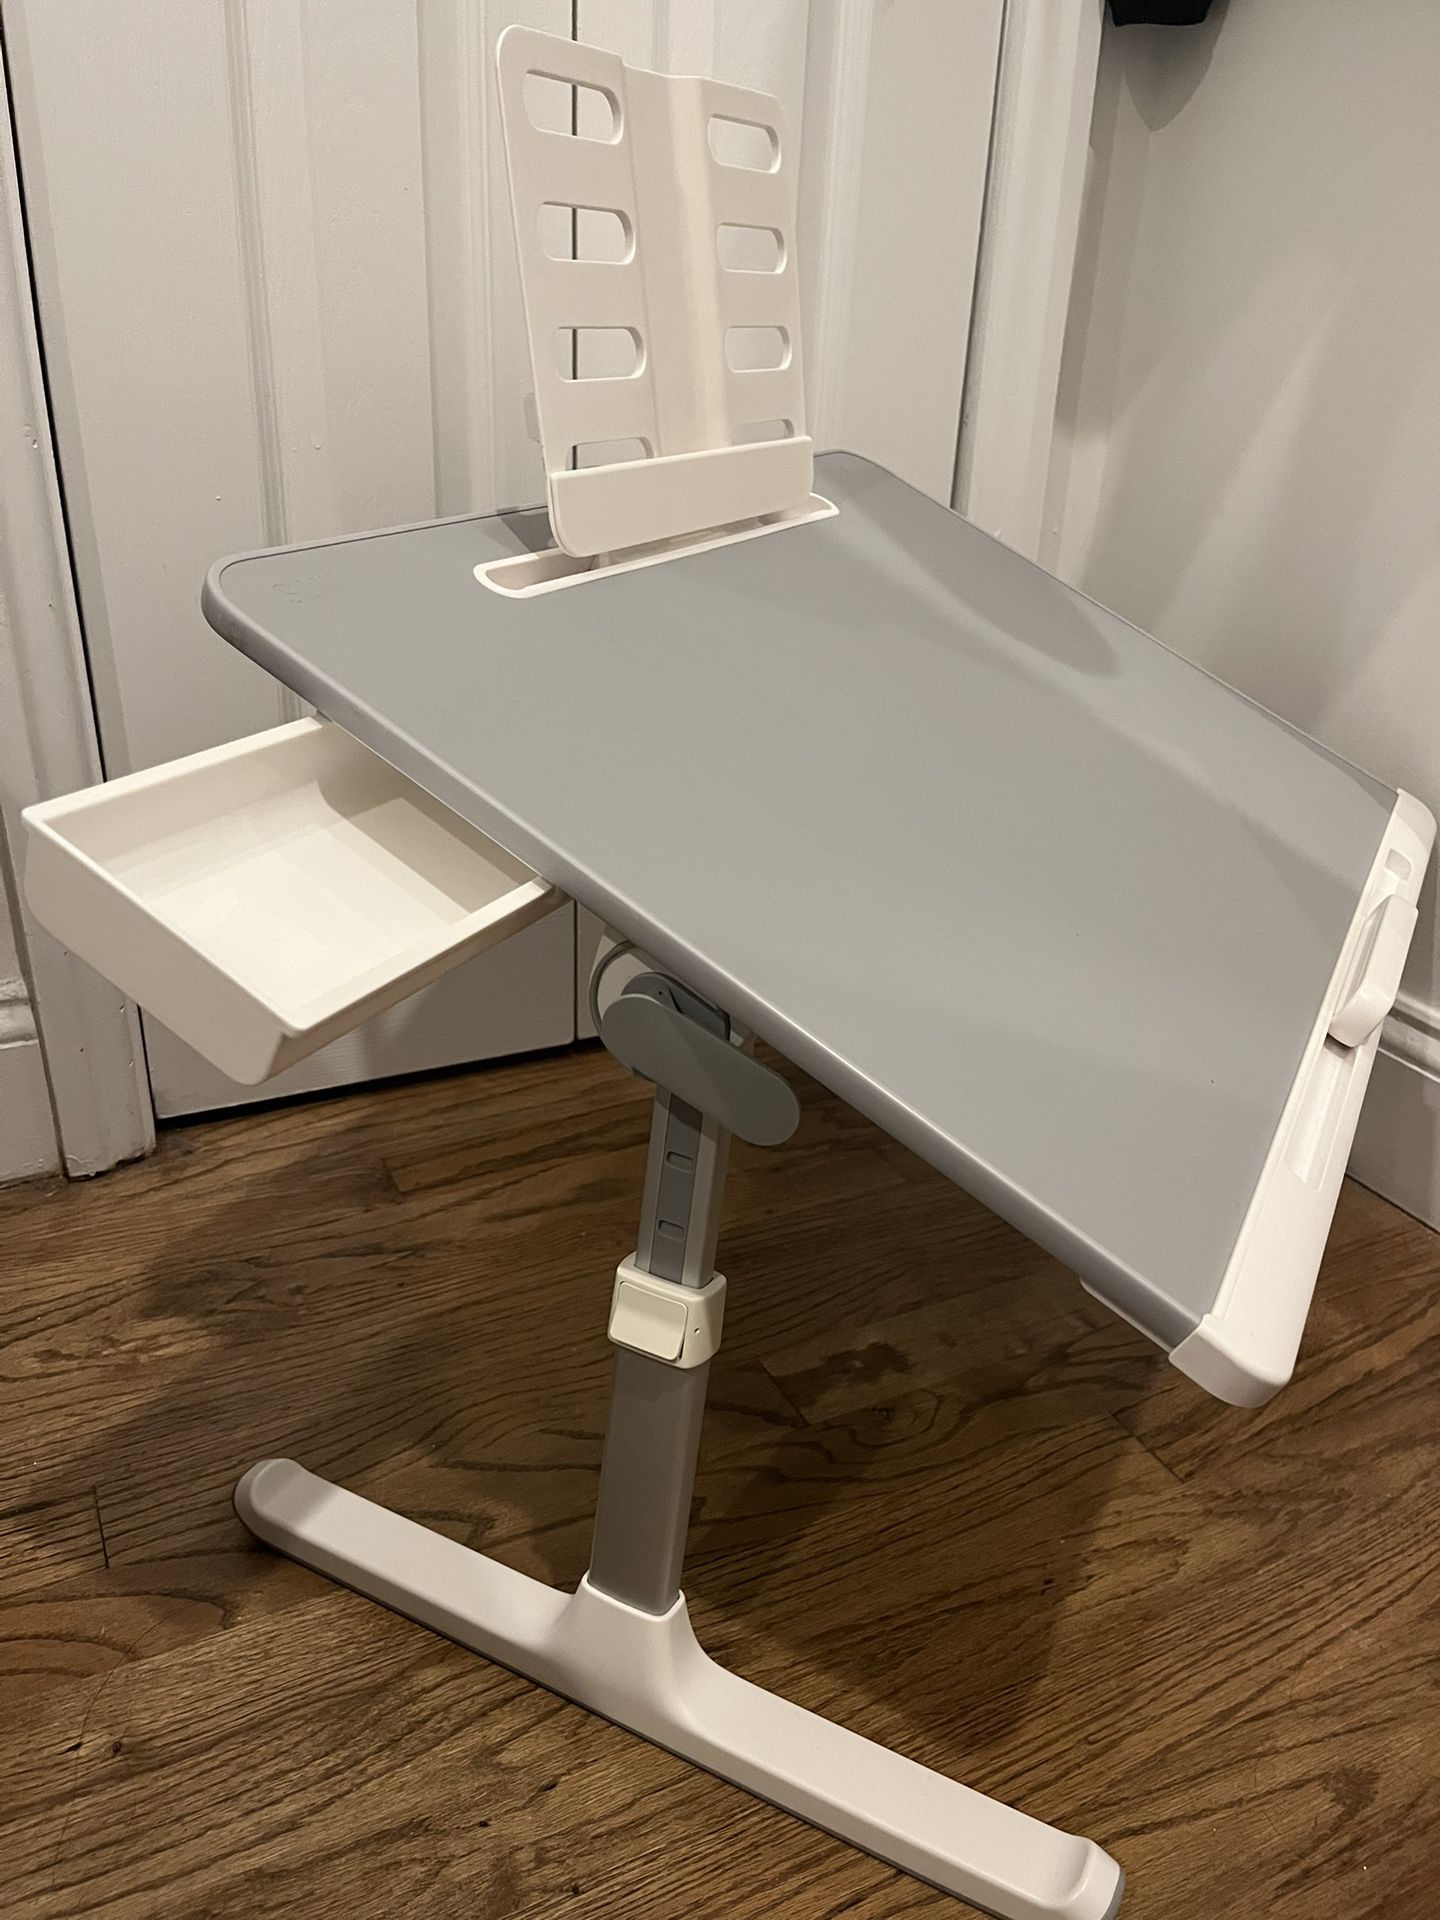 SAIJI Adjustable/Foldable Laptop Table for Sale in New York, NY OfferUp